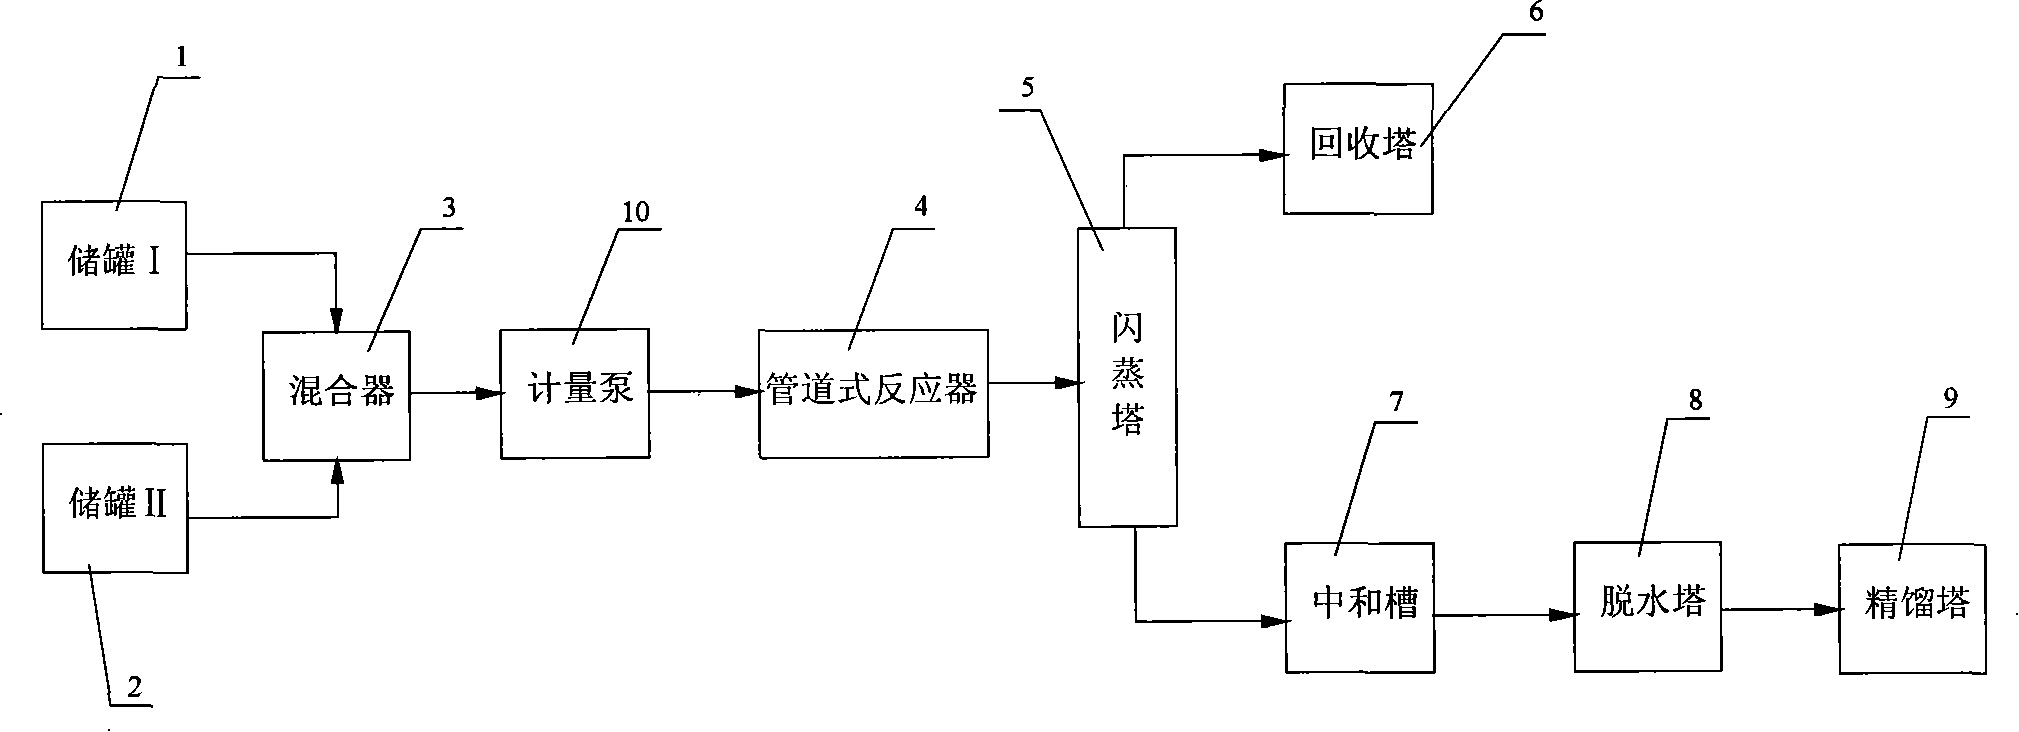 Method for synthesizing 3-amido-1,2-propanediol by pipe reactor